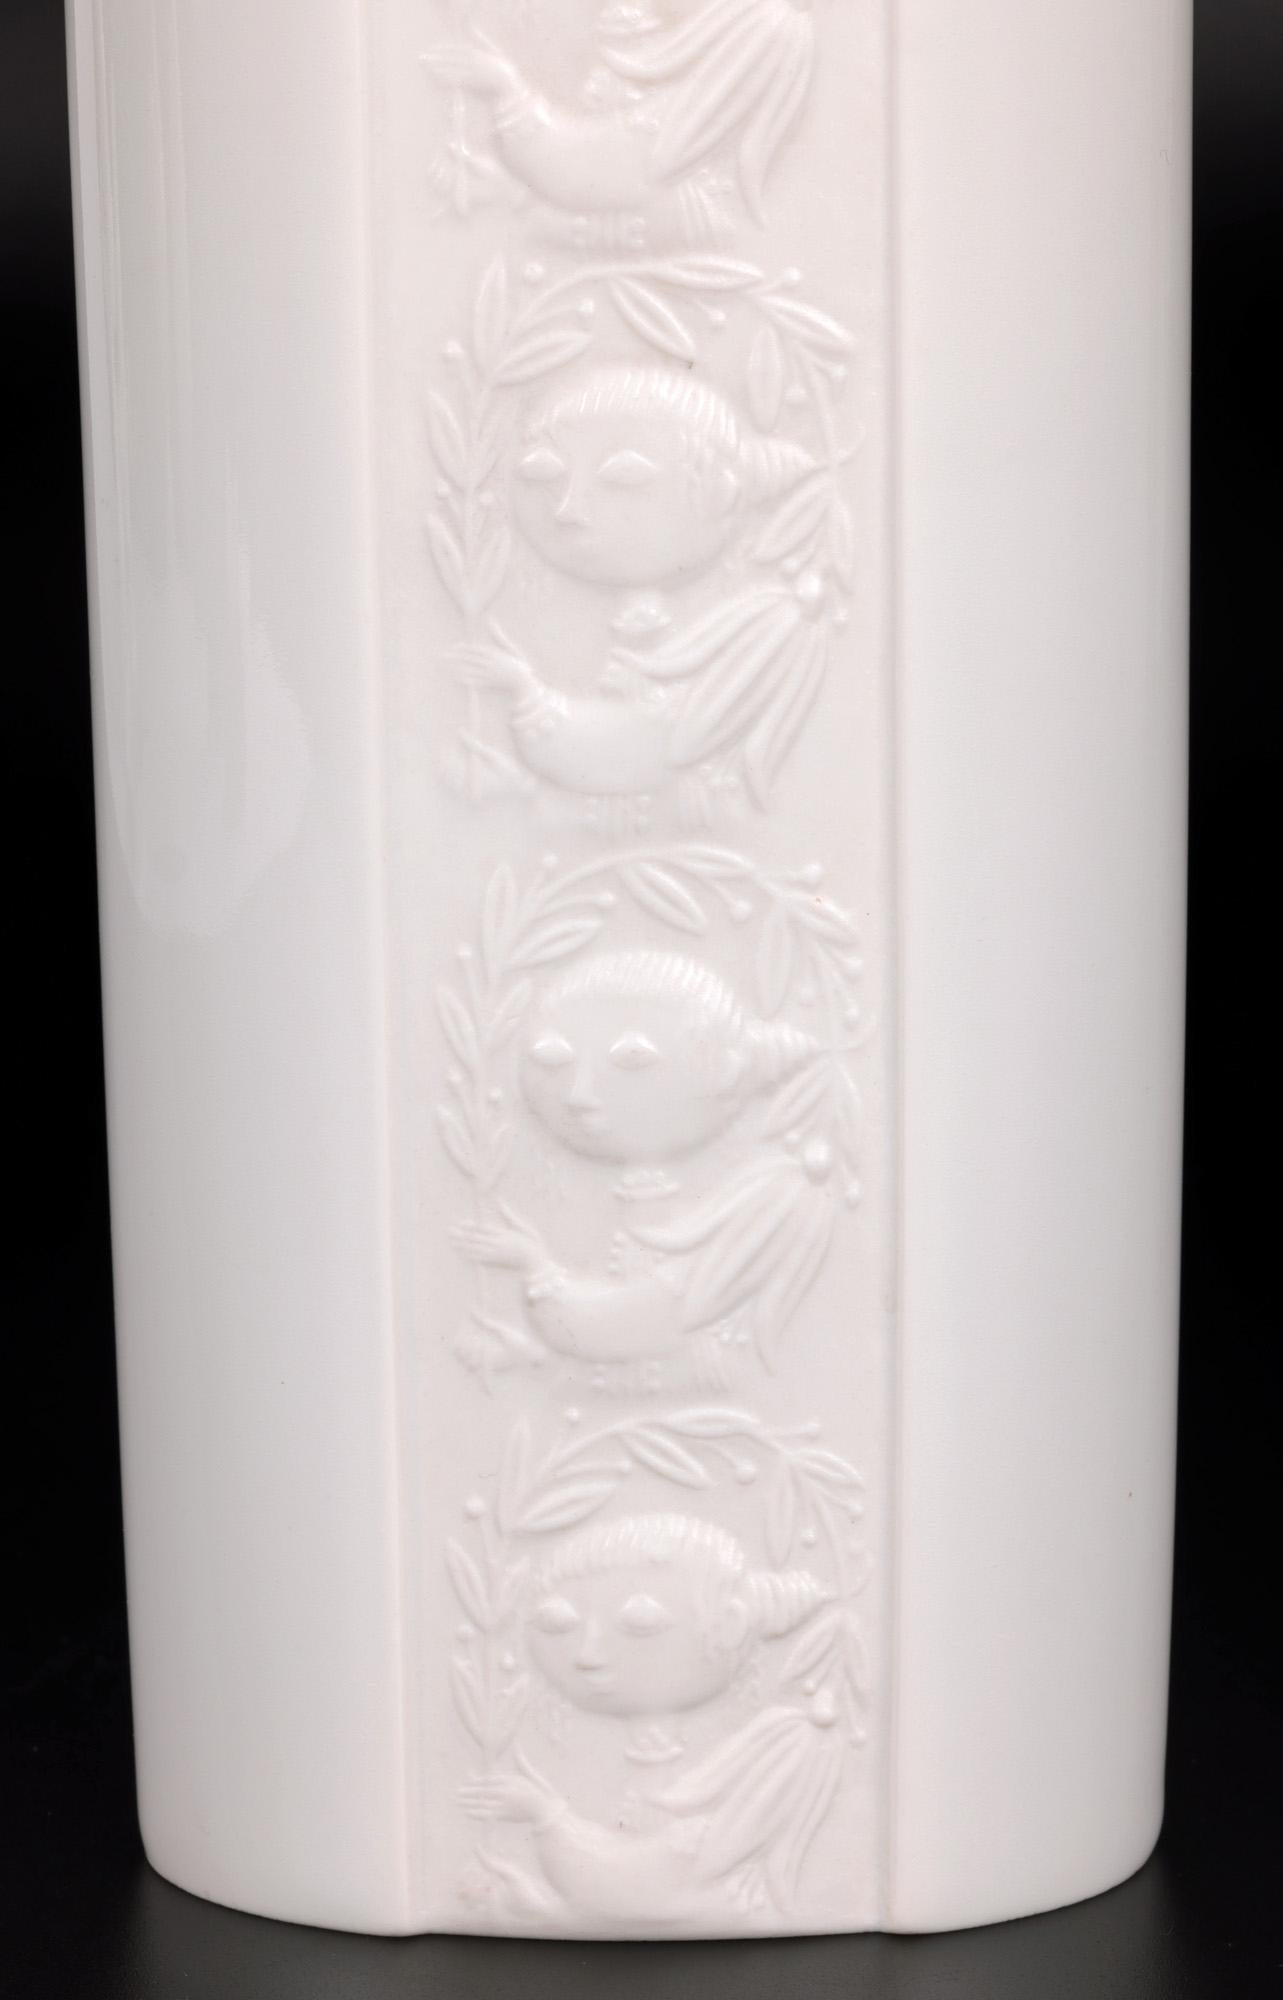 A finely made and stylish mid-century Rosenthal porcelain vase decorated with a figure holding a tall floral stem designed by renowned Danish born artist Bjorn Wiinblad (1918-2006). This very fine and lightly made white porcelain vase is of tall